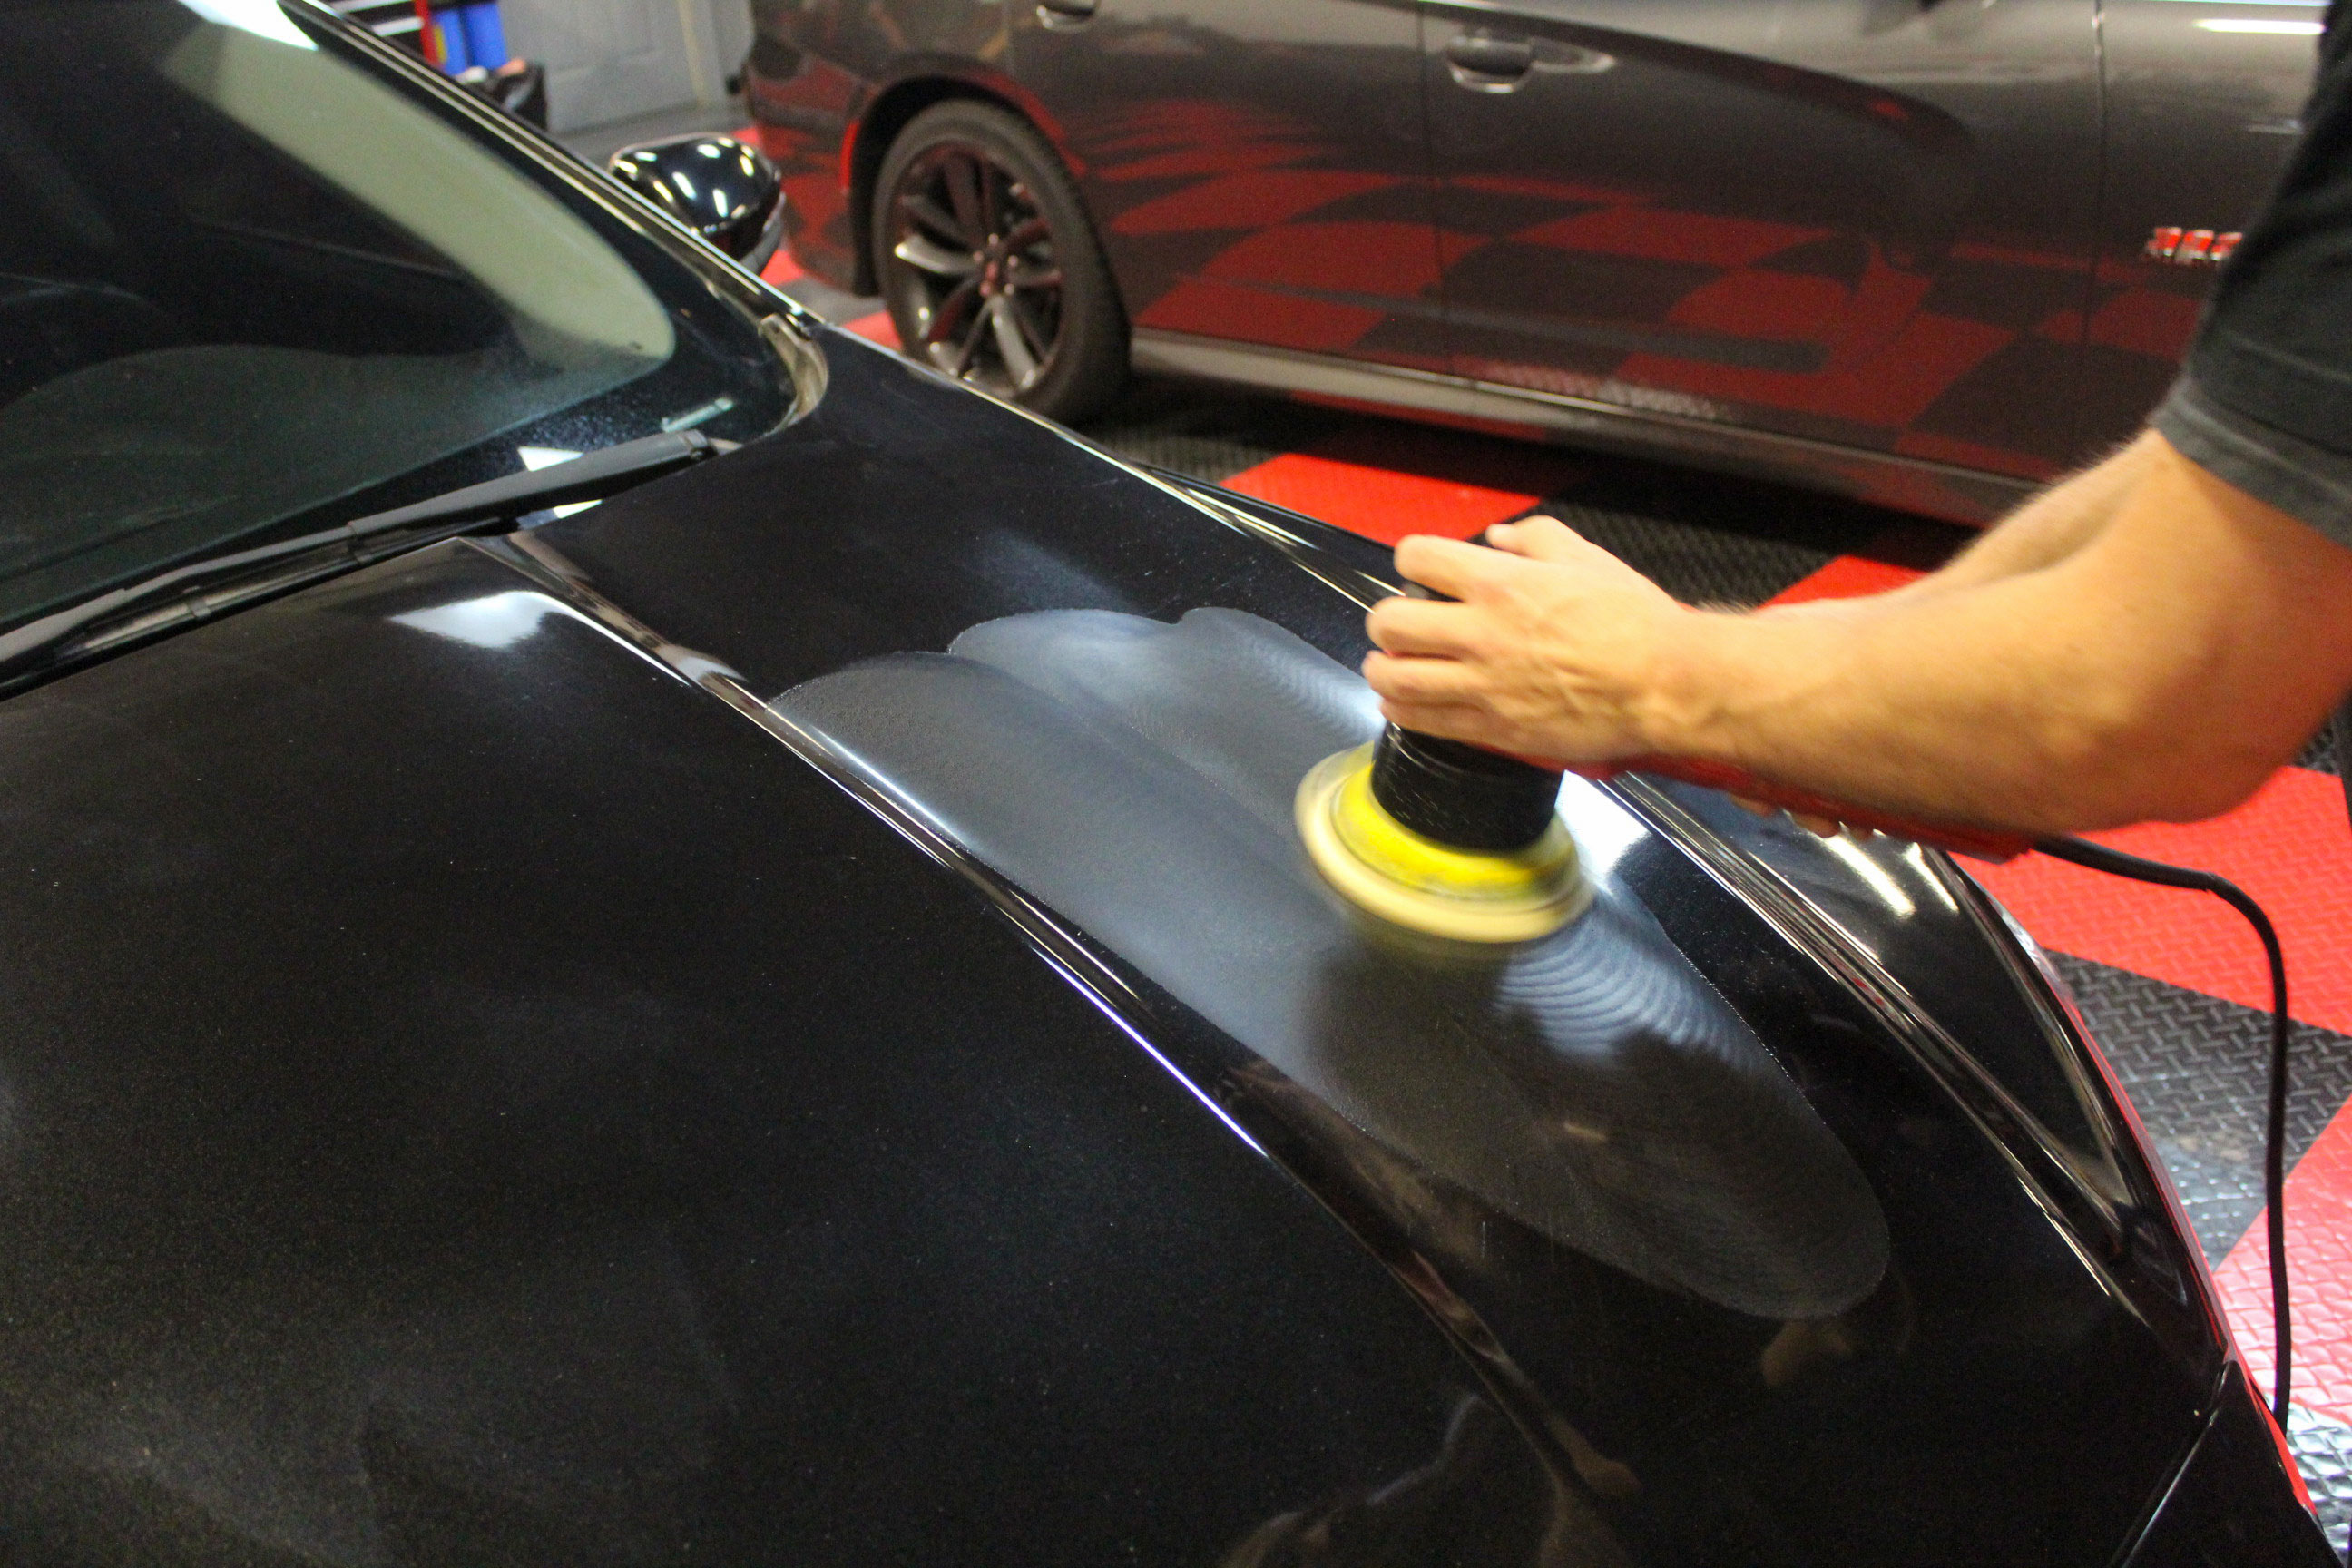 By shining the flashlight on the paint and looking at the perimeter of the on the light, we will be able to get a good view of the severity of the scratches, swirls, and defects in the paint.